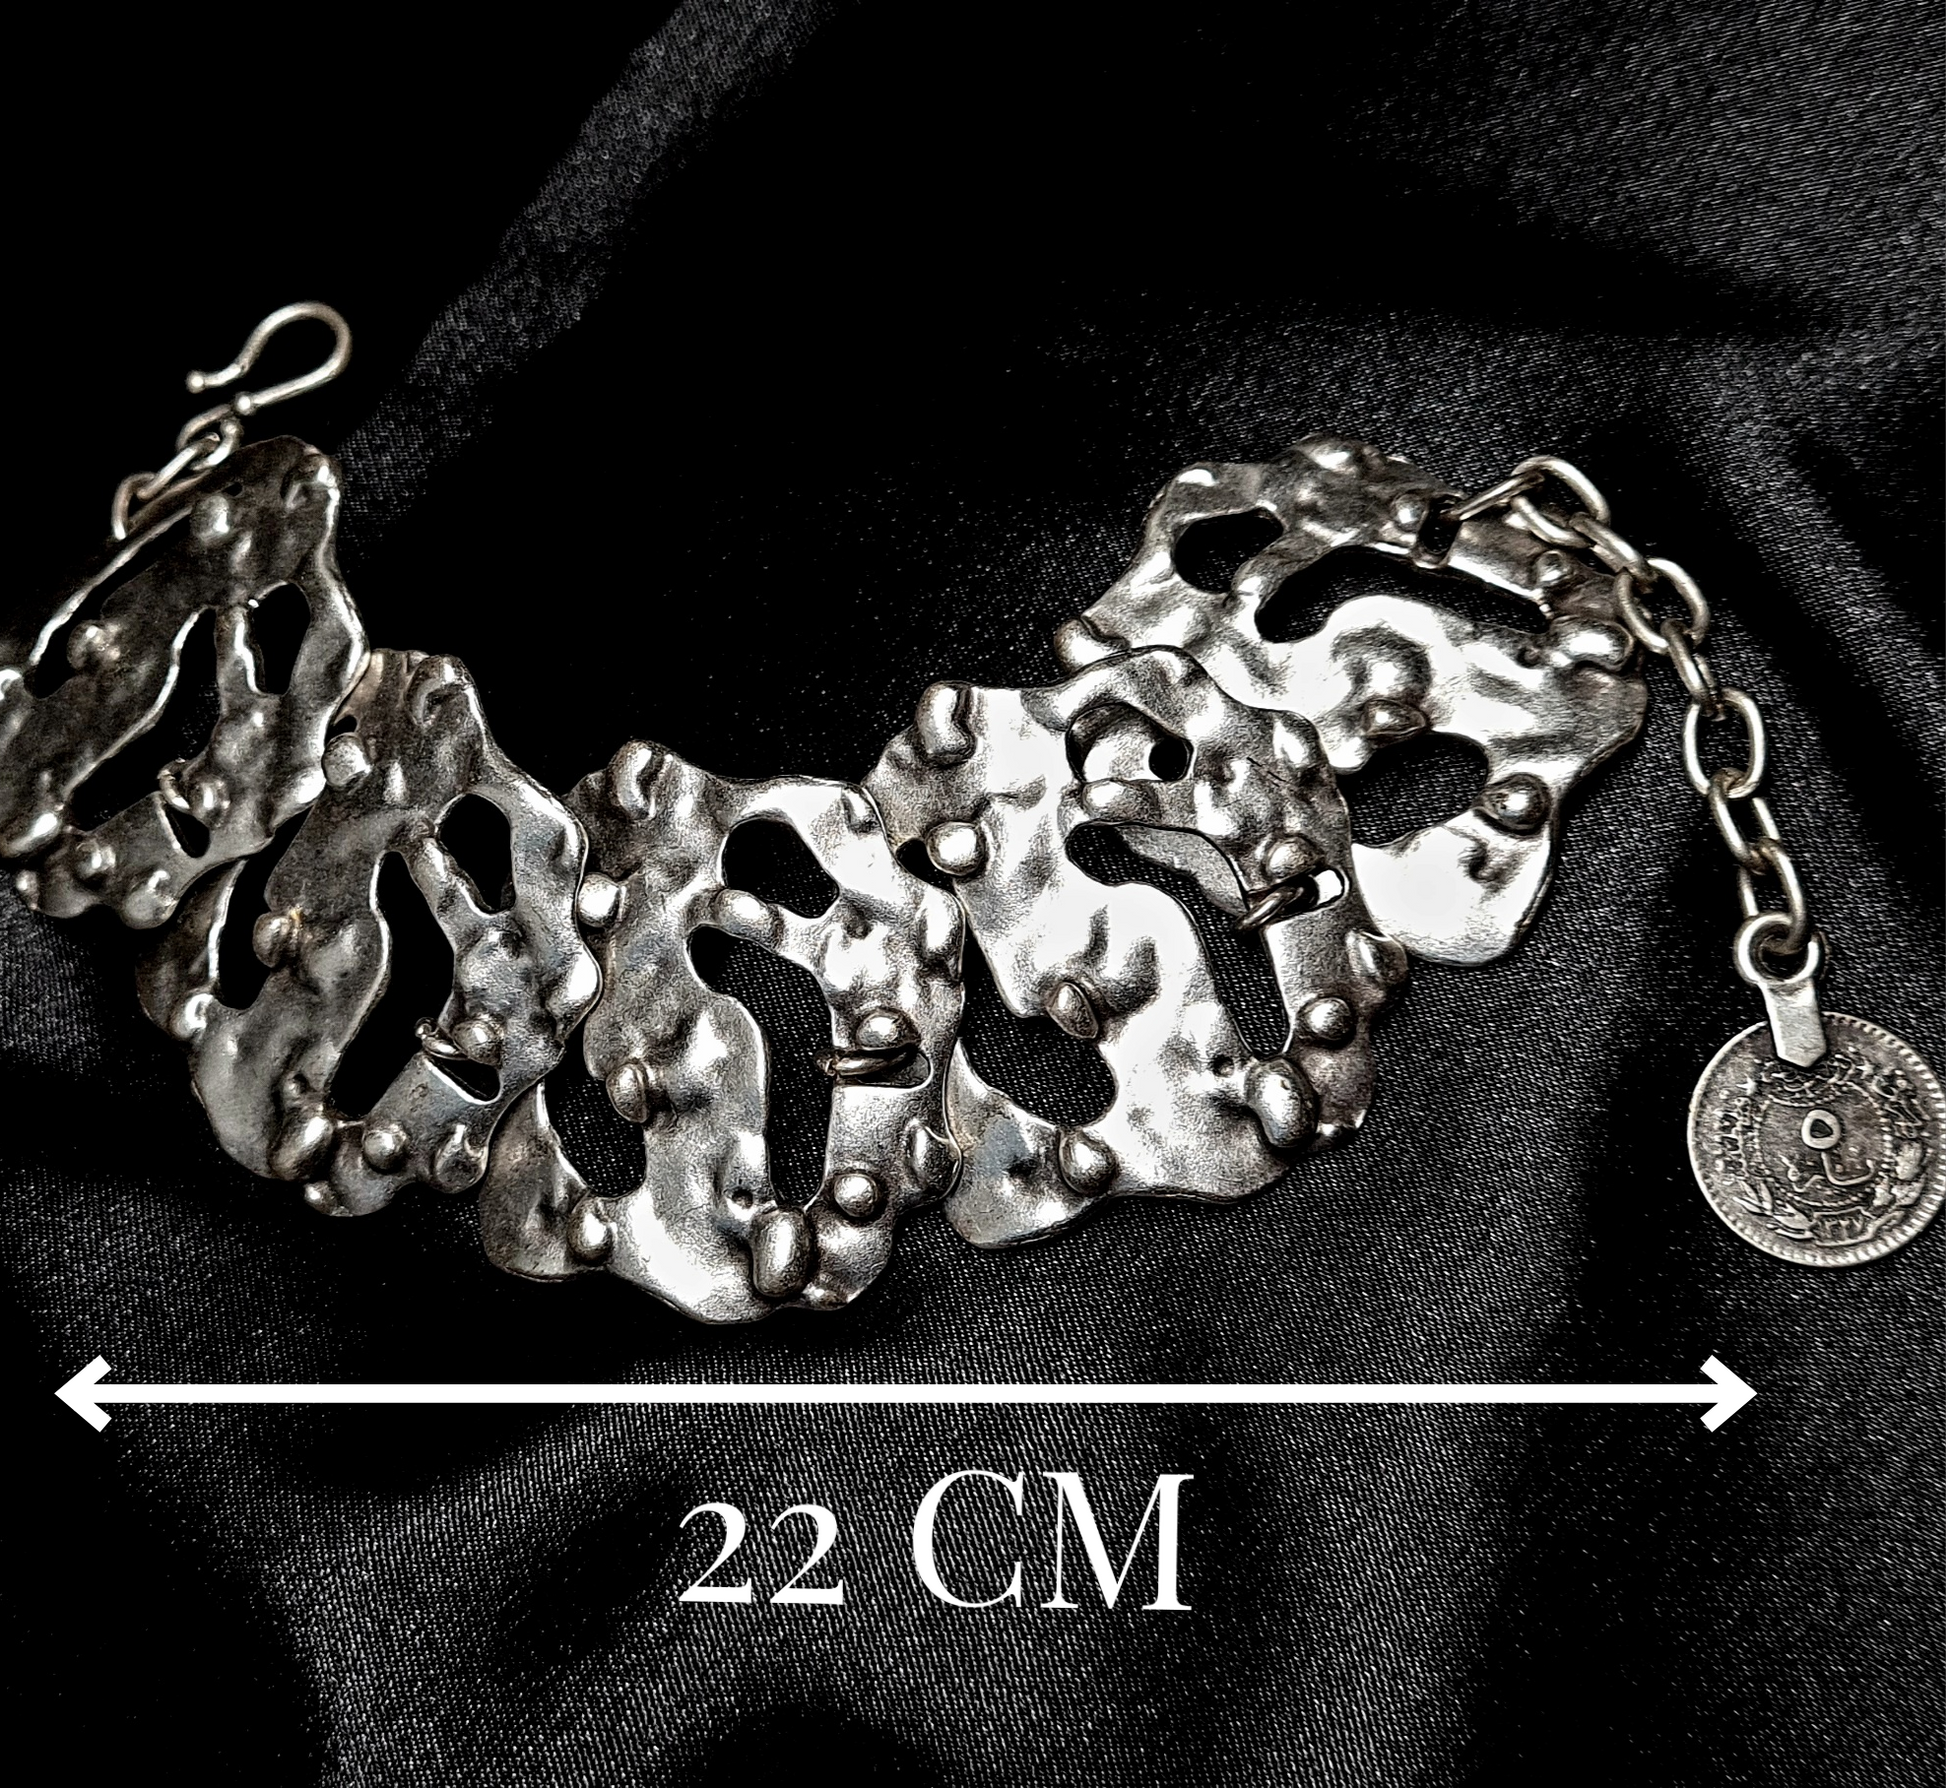 A silver bracelet sitting on a black cloth. The bracelet is made of silver and has a delicate design. The coin is small and round, and it has a silver color. The bracelet is on a black cloth with measure.